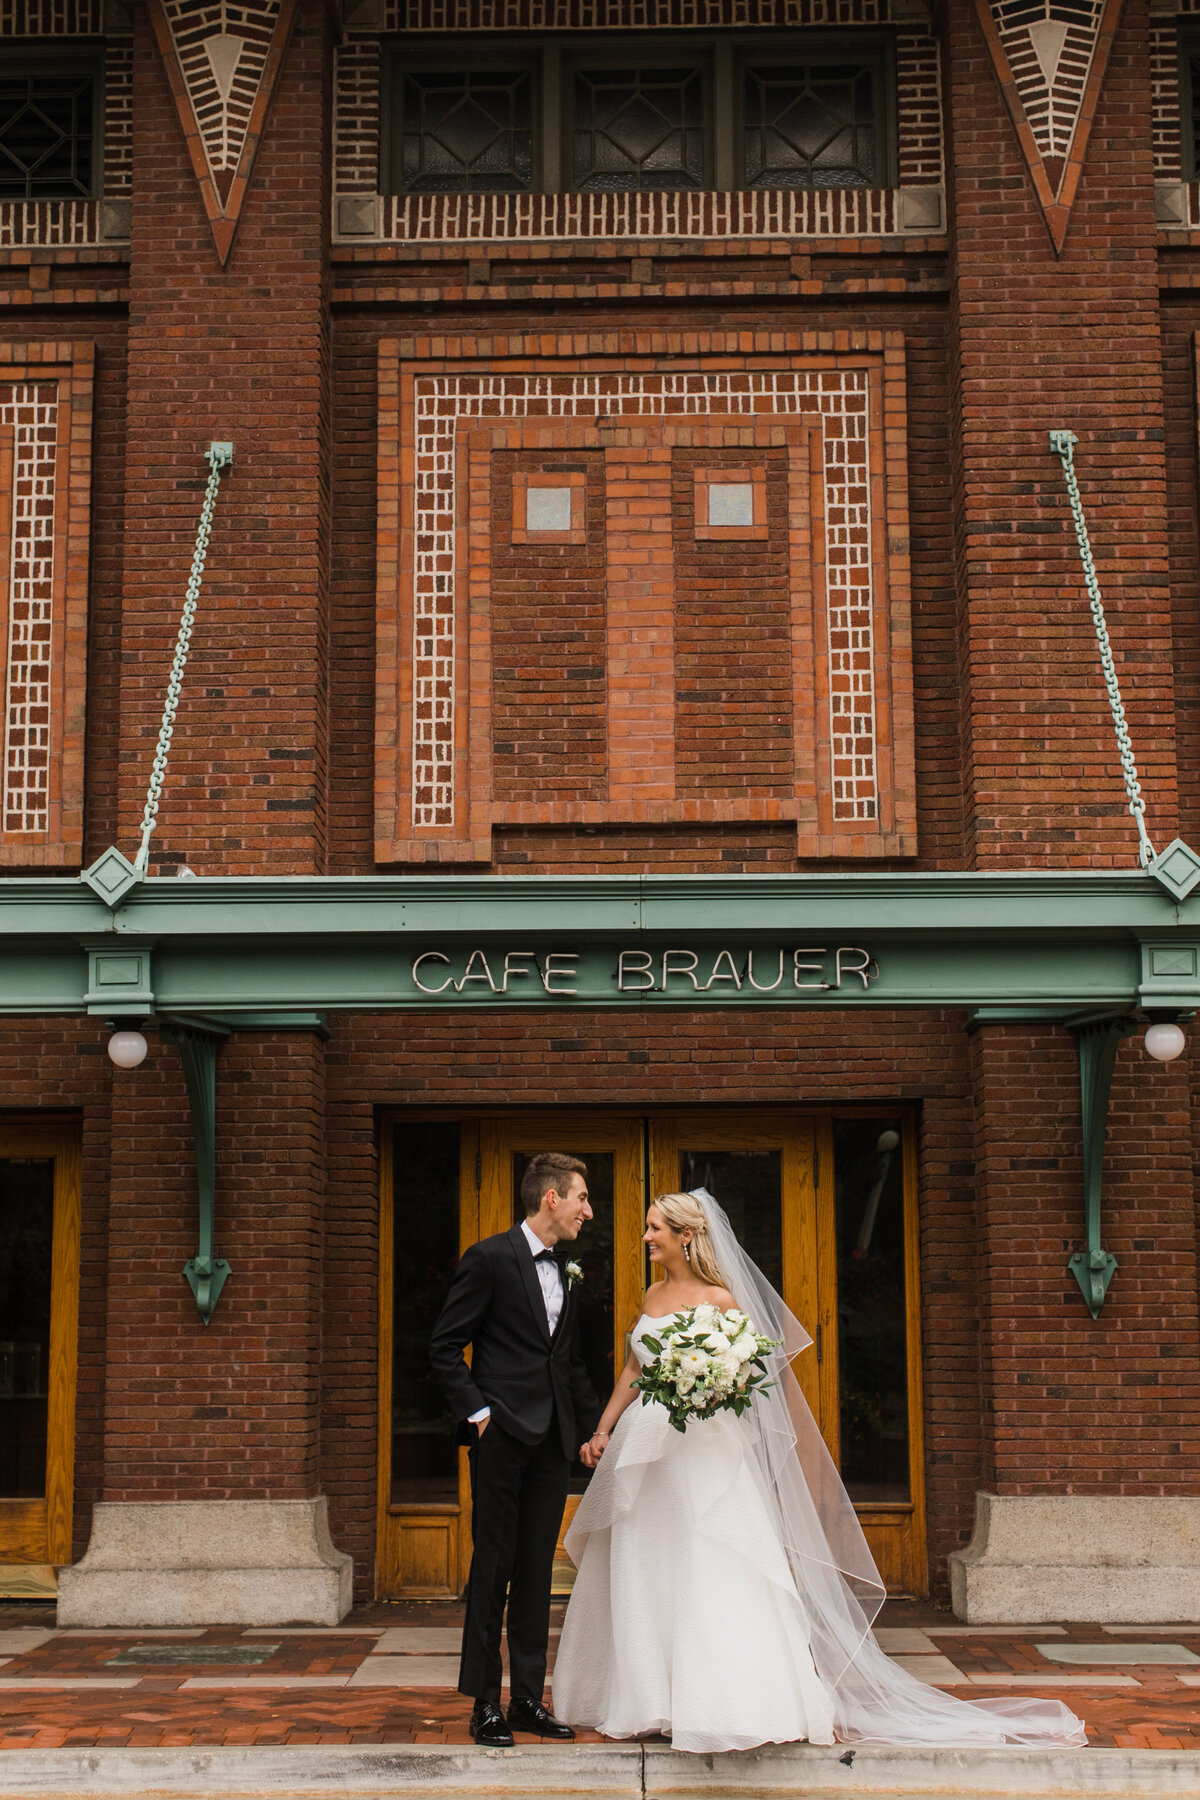 A bride and groom pose in front of the Cafe Brauer entrance for a wedding photo